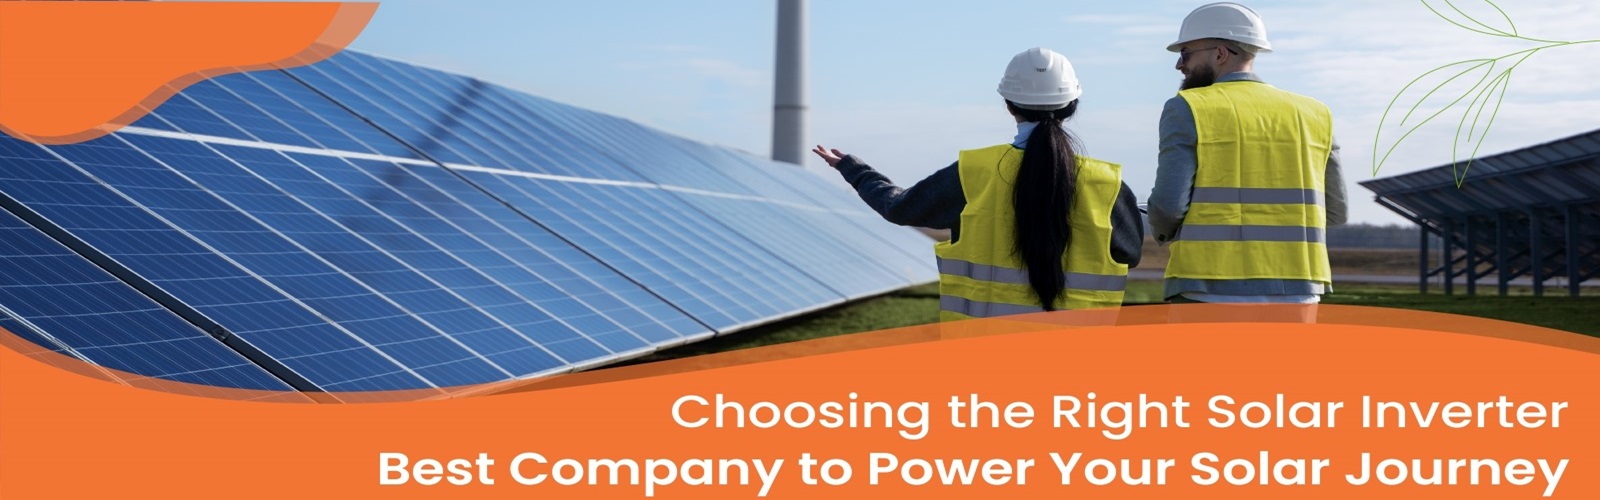  Choosing the Right Solar Inverter: Best Company to Power Your Solar Journey